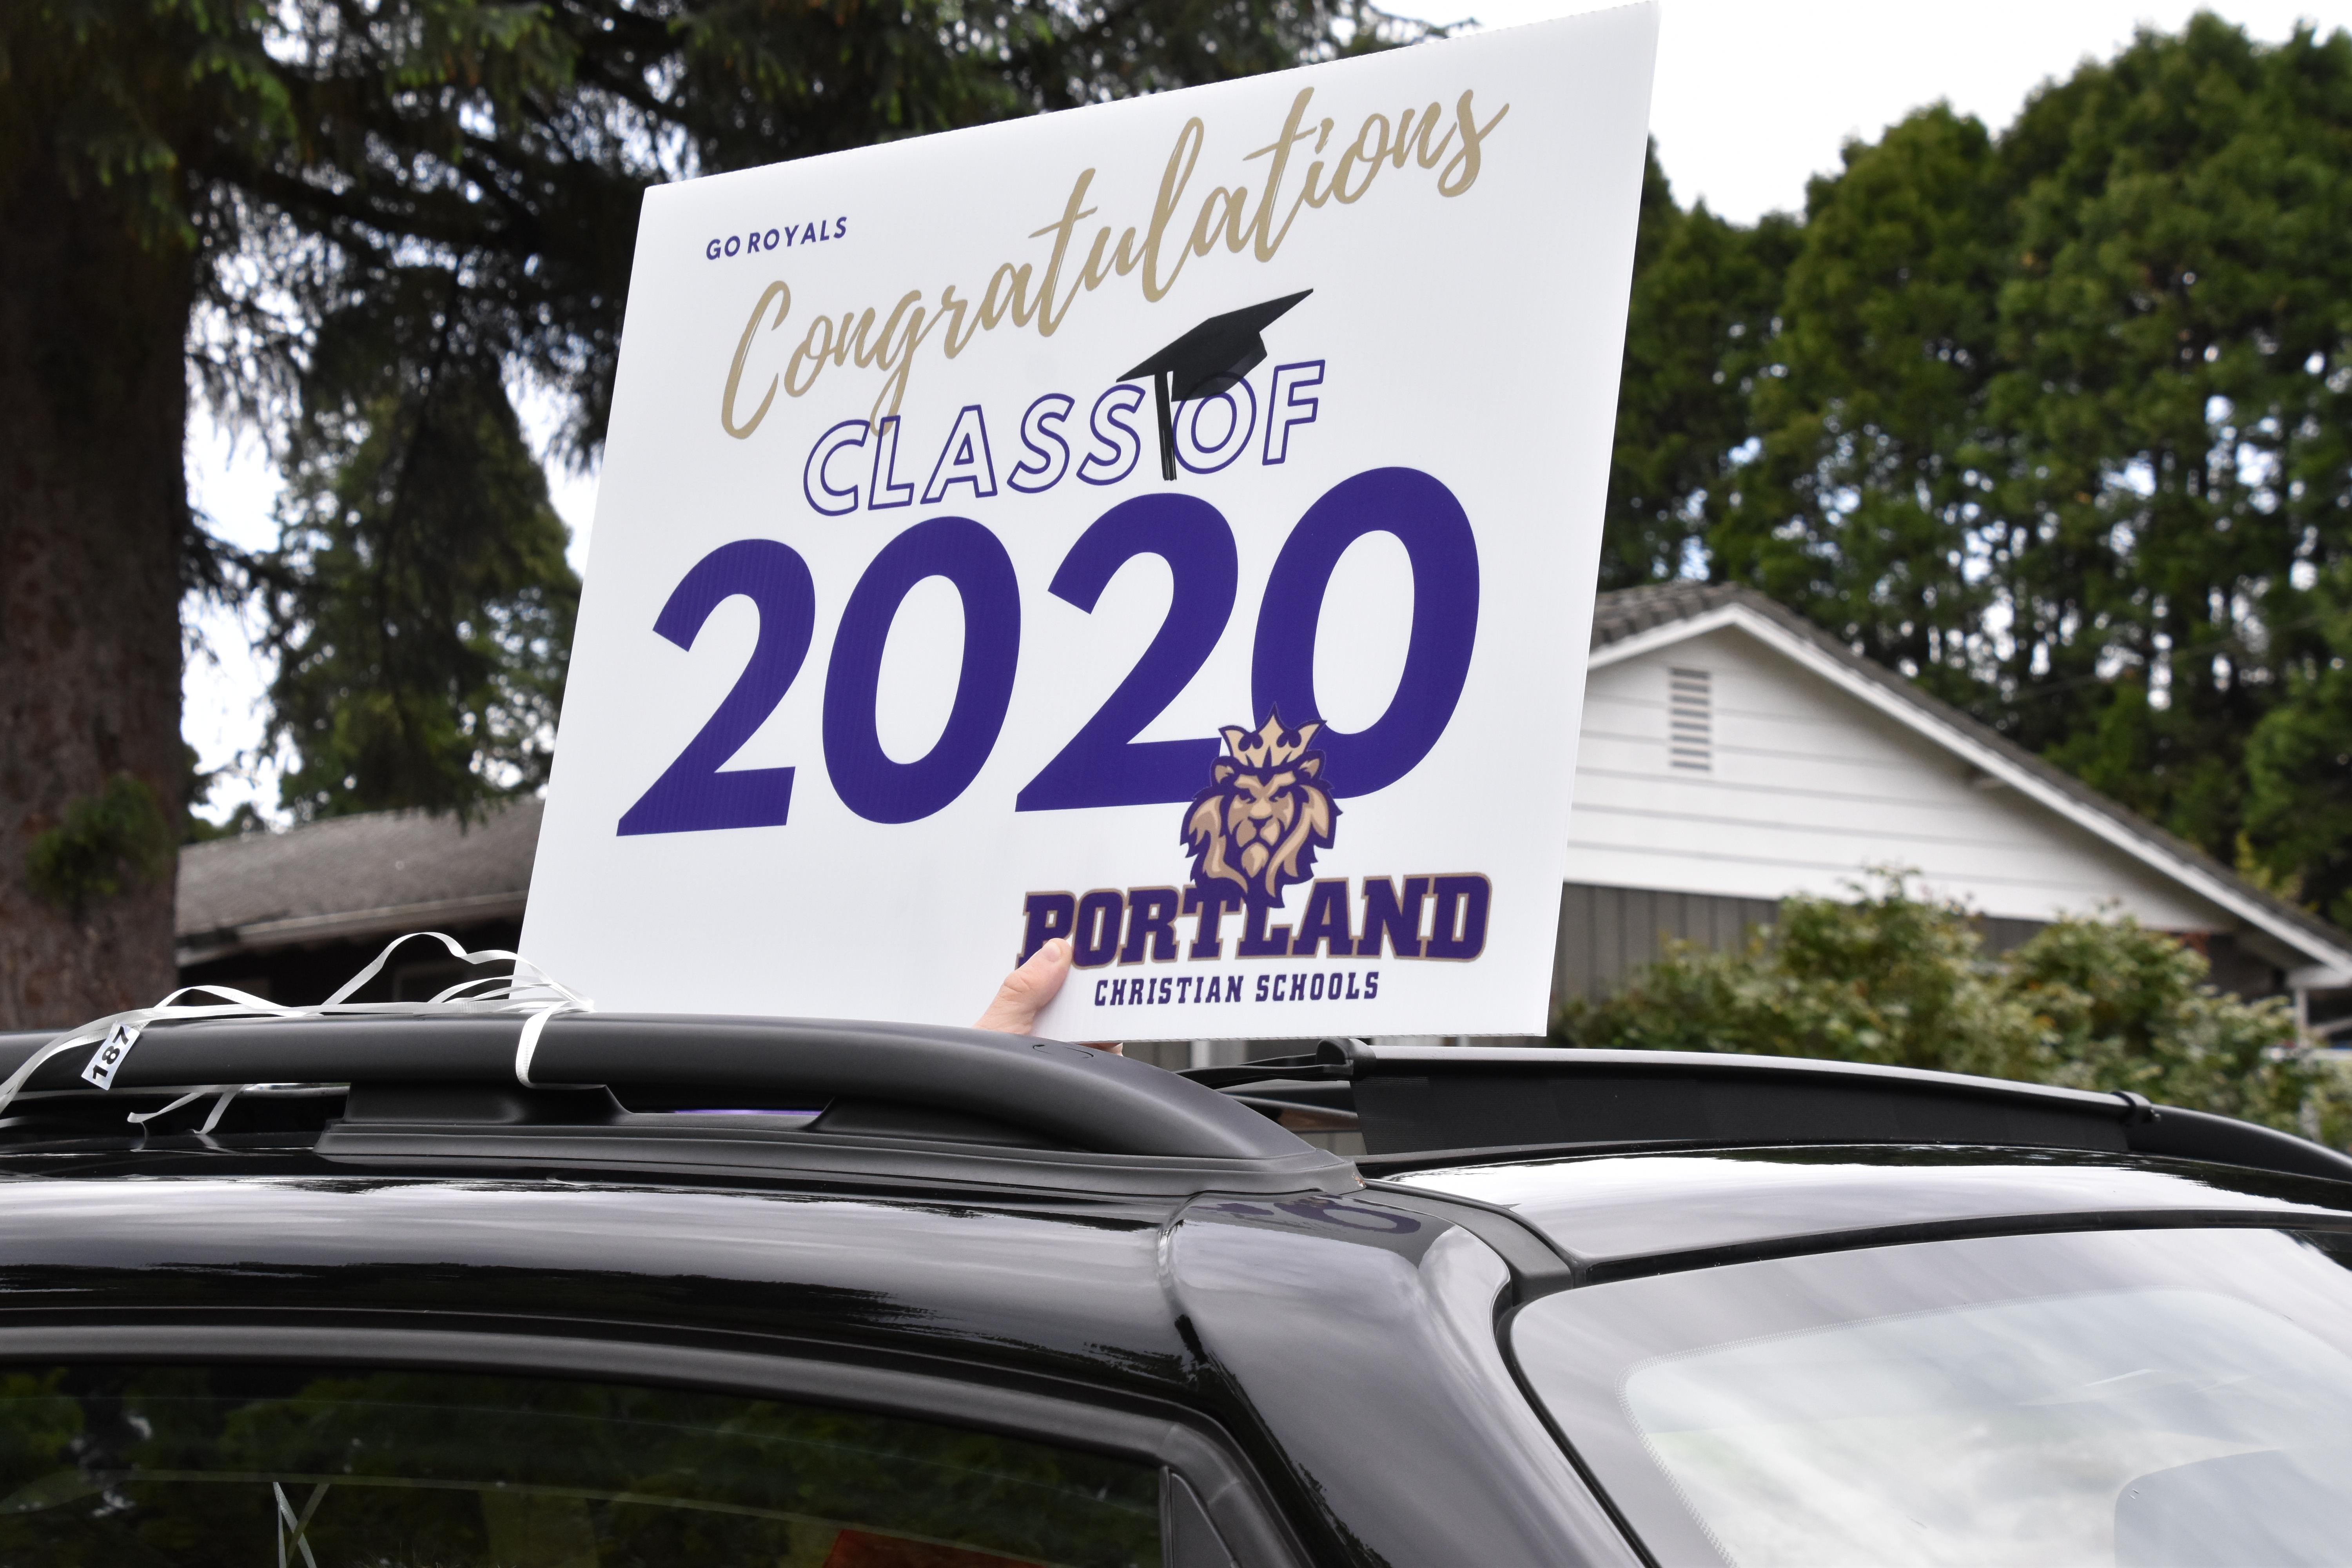 Out of car roof, the congratulations yard sign